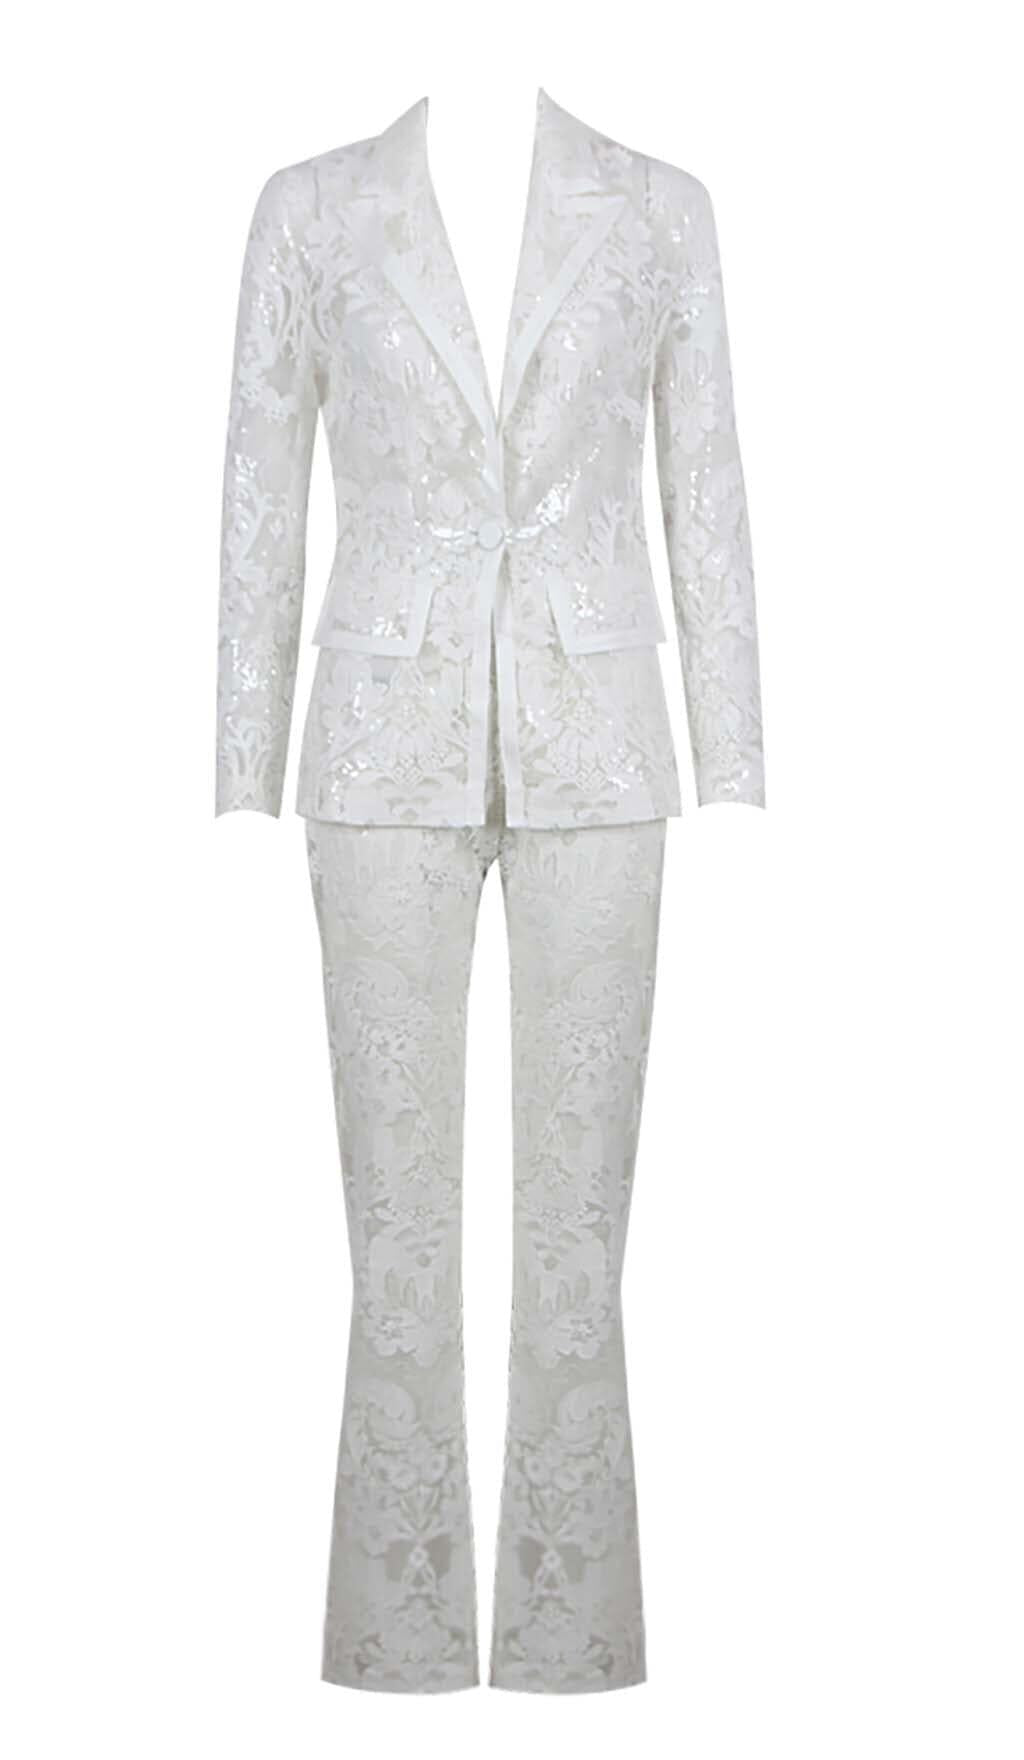 EMBROIDERED LACE MESH JACKET SUIT IN WHITE